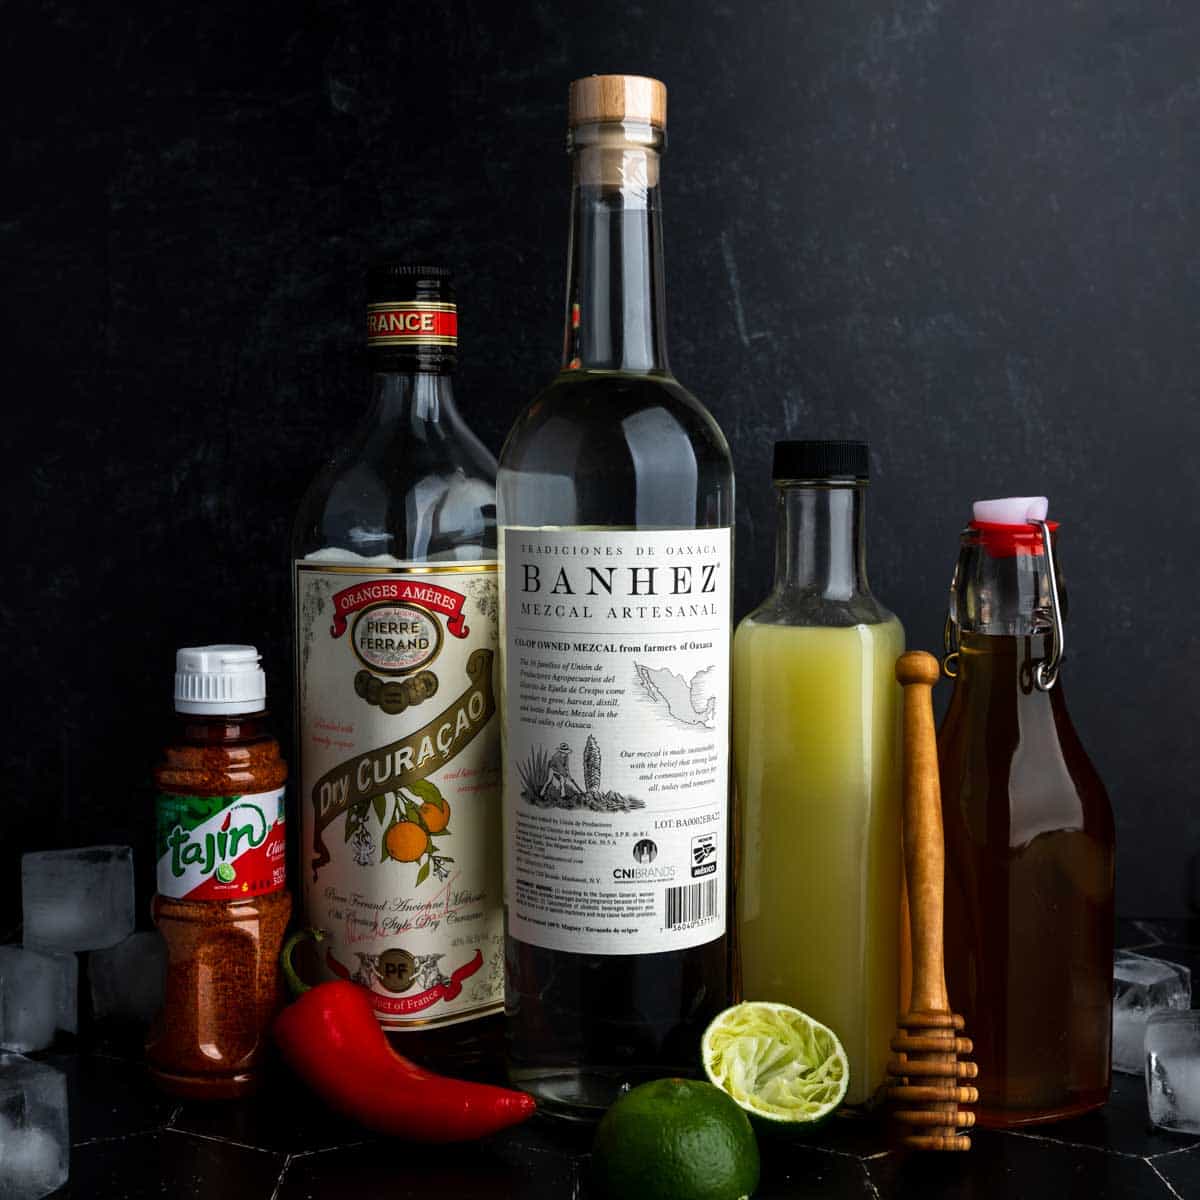 An image of ingredients needed to make this margarita recipe